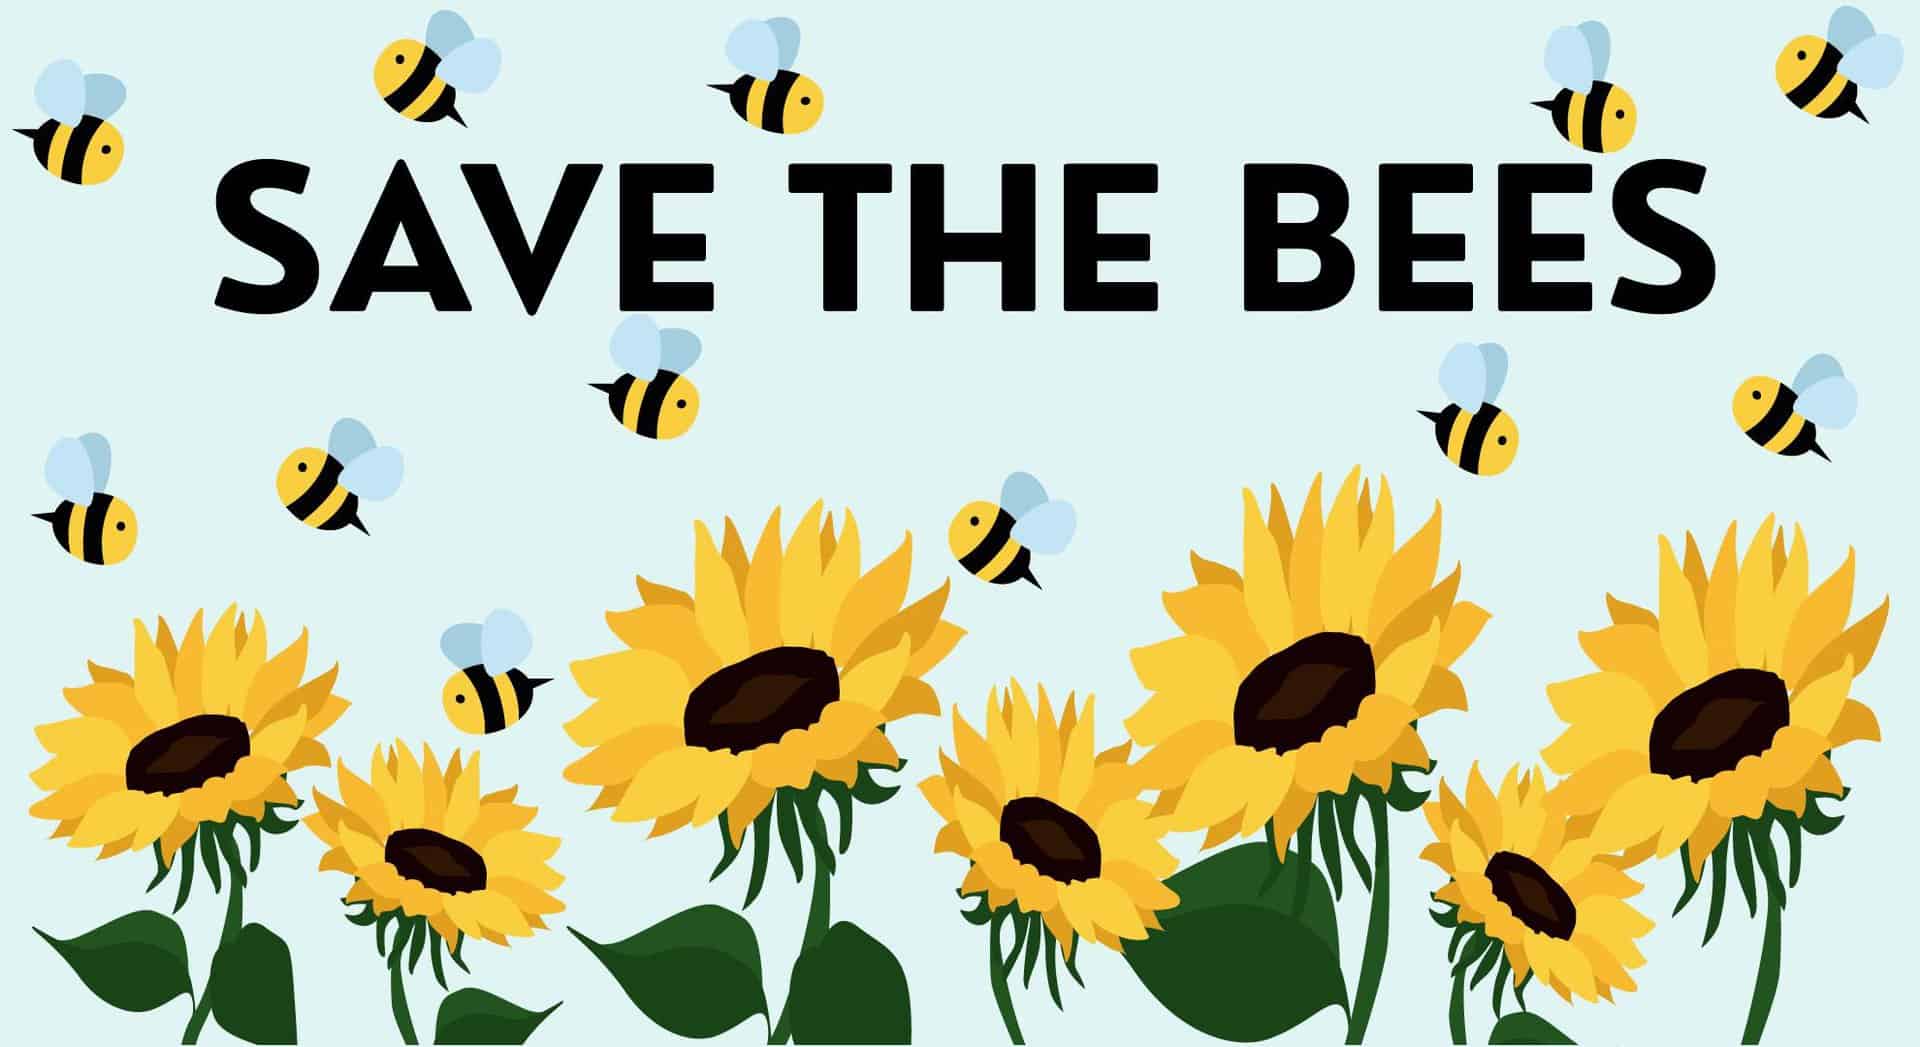 Save the Bees fundraiser at The Floridian Social